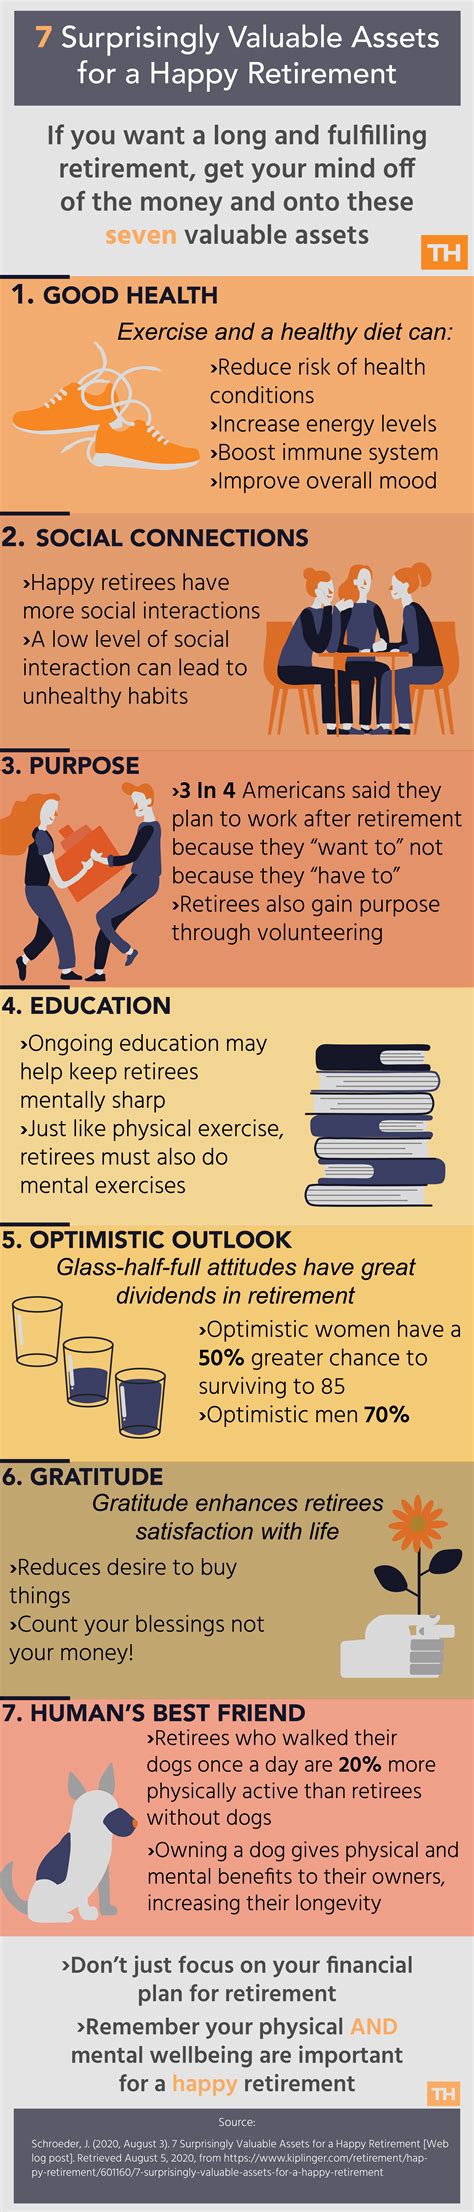 7 tips to a happy retirement